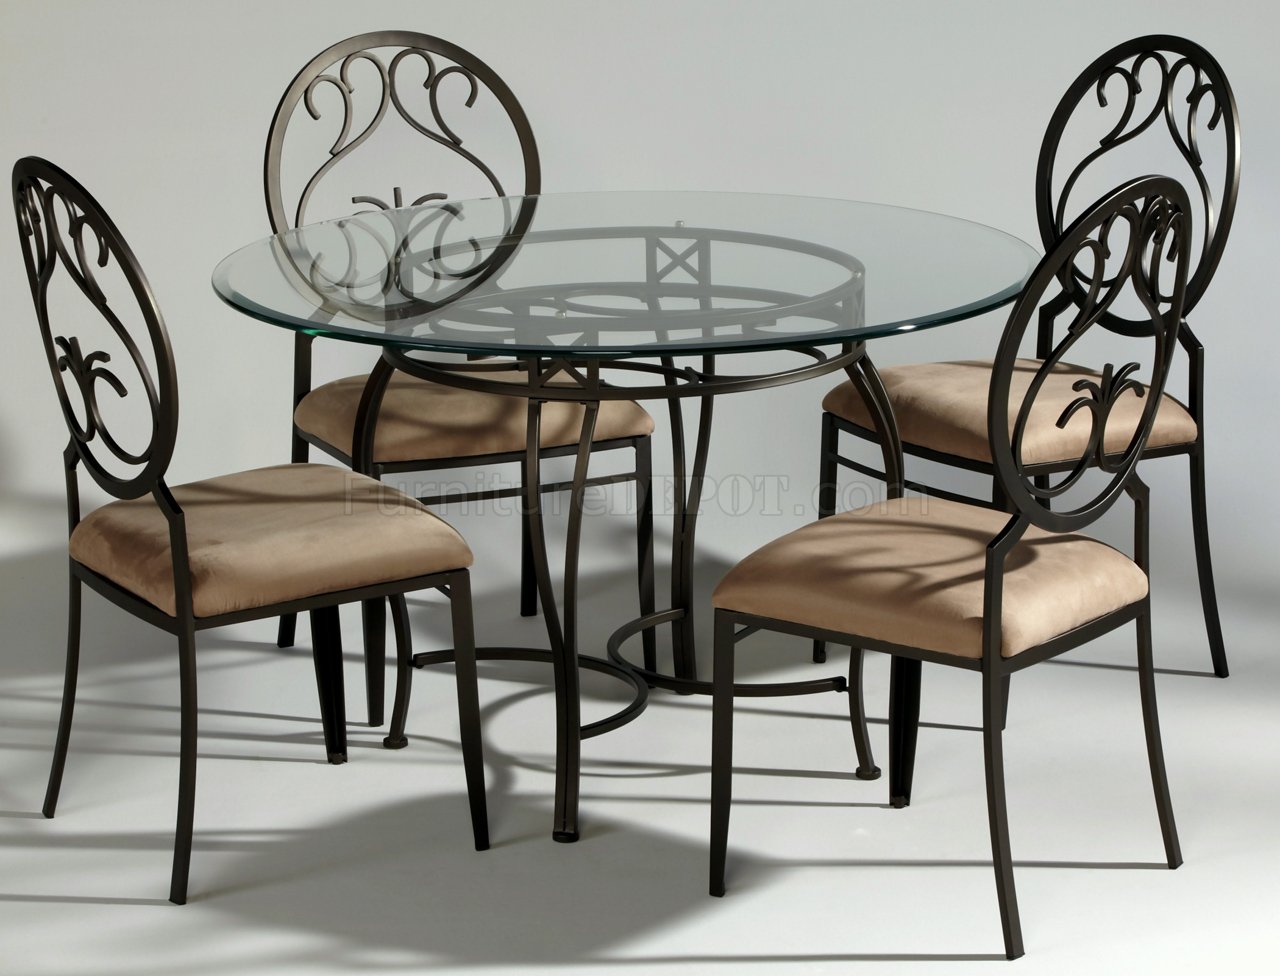 Dark Champagne Metal Modern Dining Table w/Optional Chairs